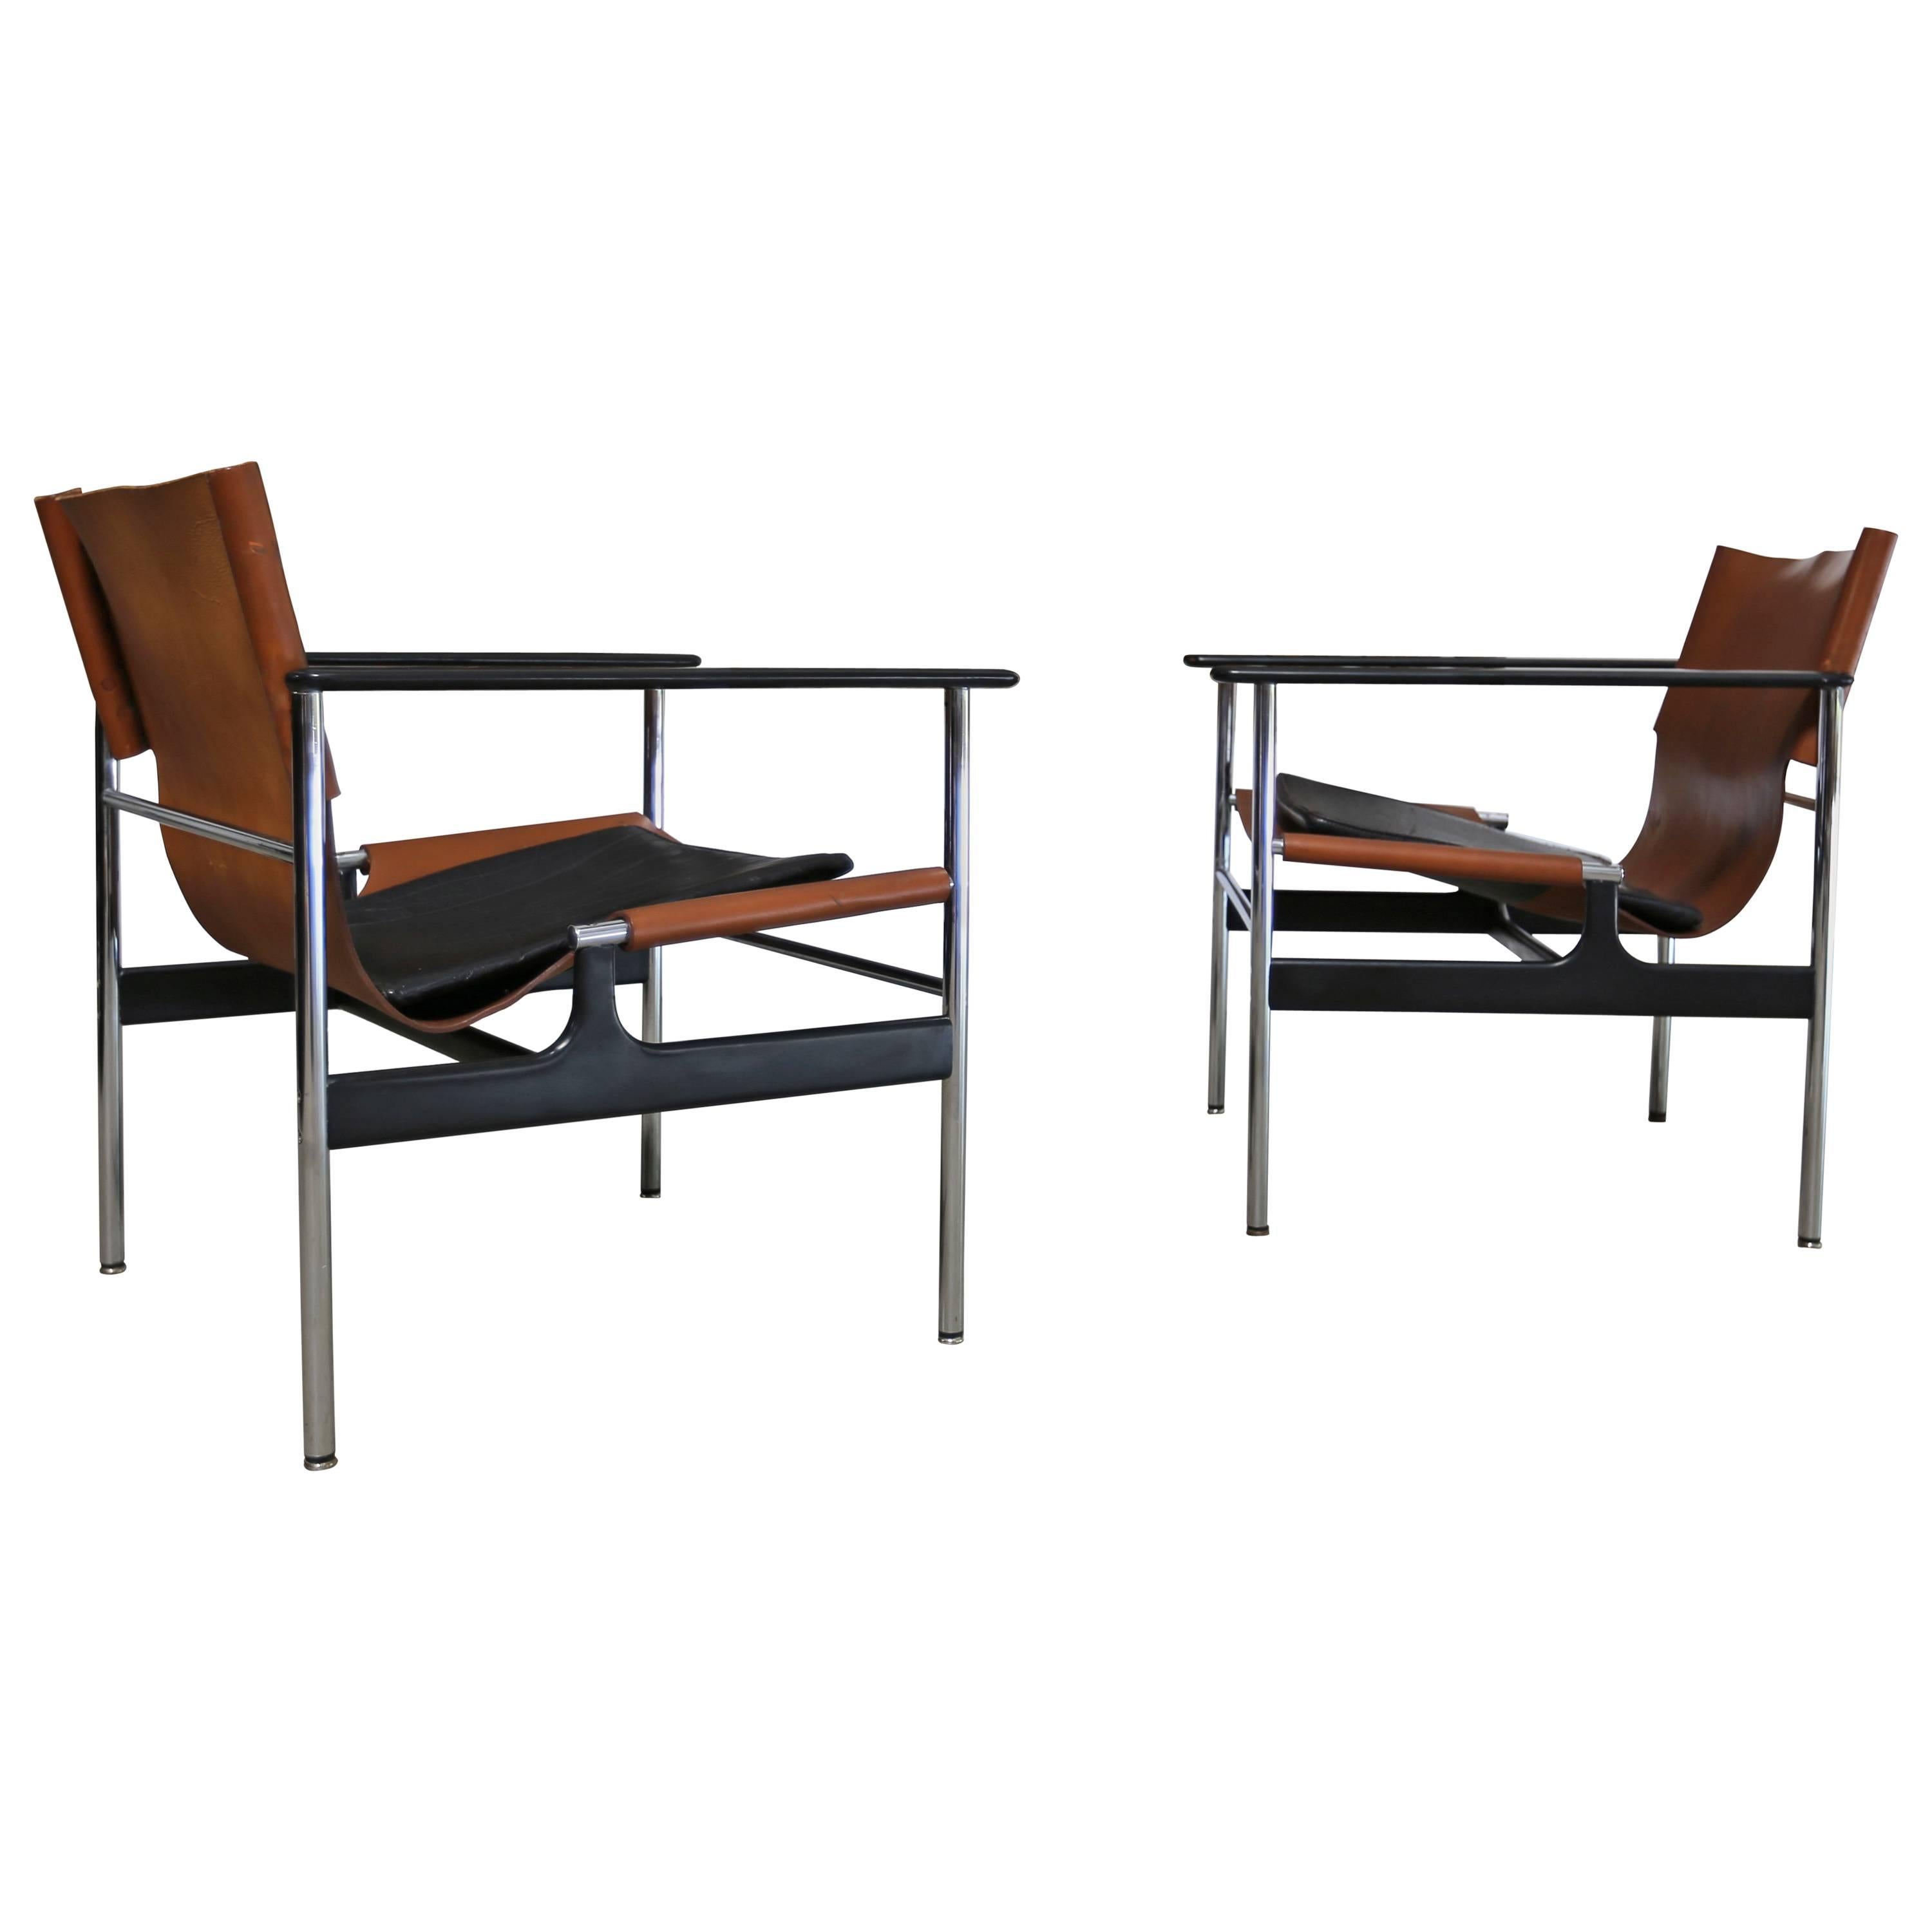 Pair of Lounge Chairs by Charles Pollock for Knoll